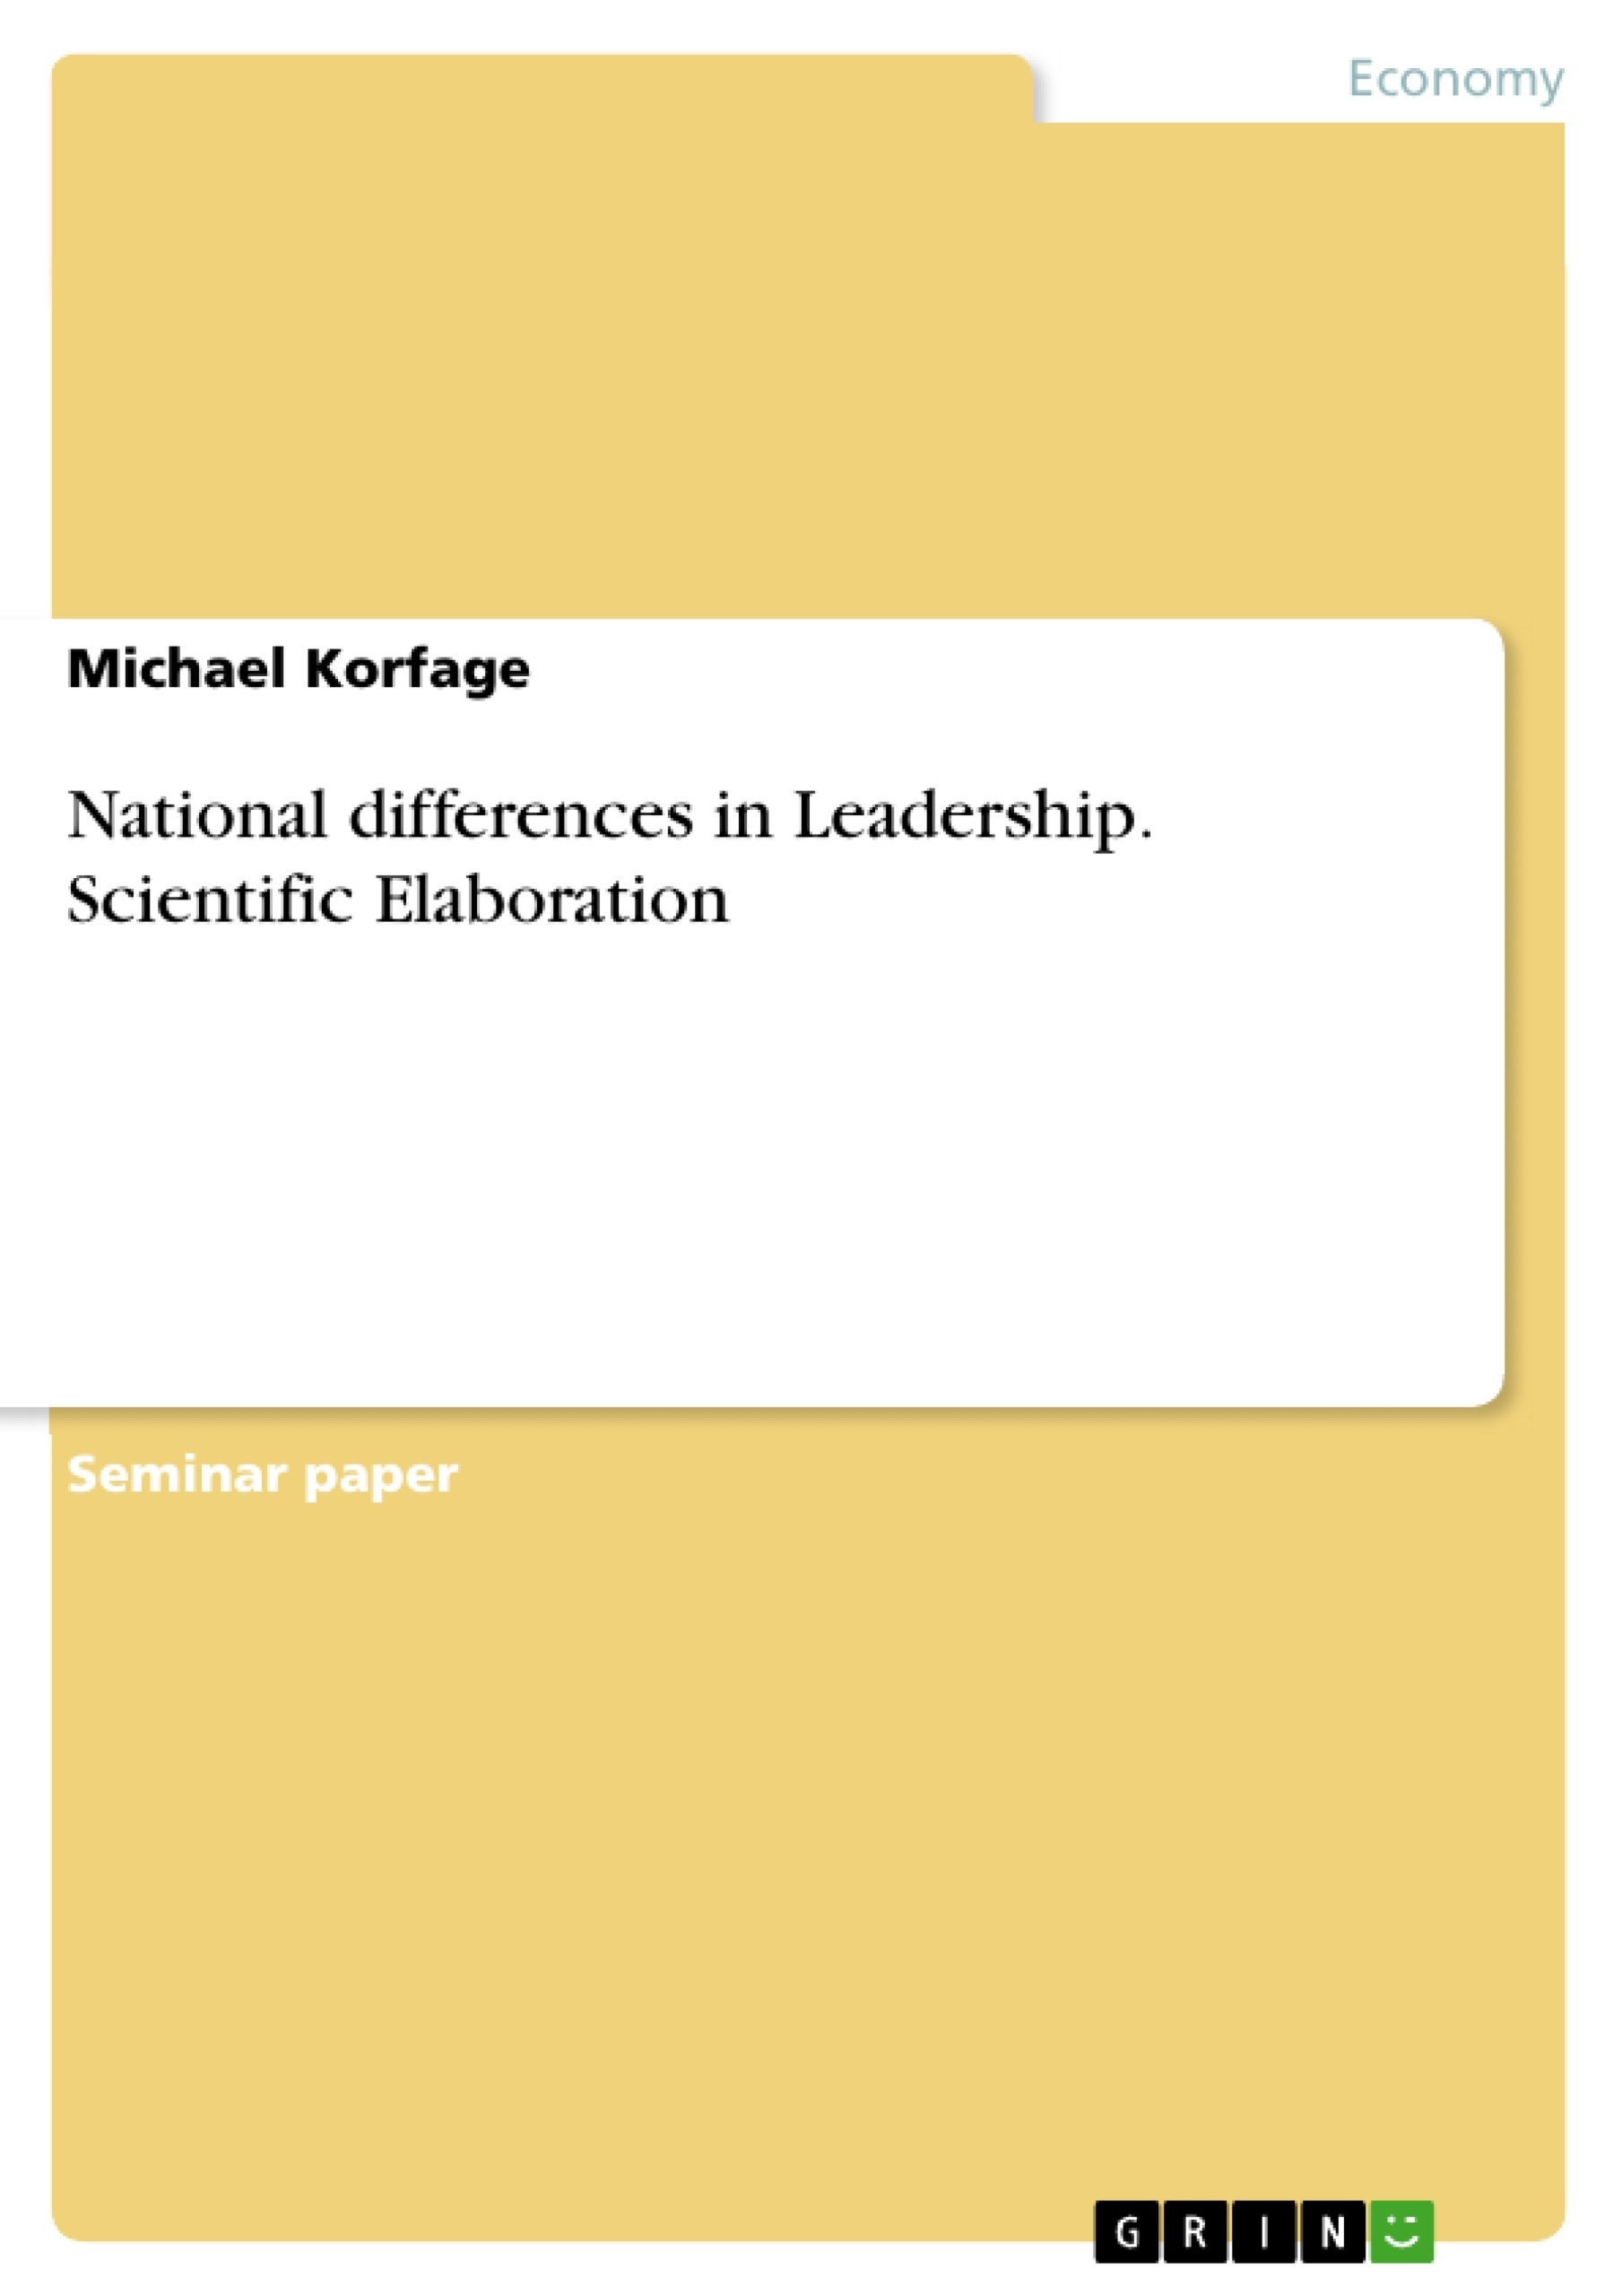 Titre: National differences in Leadership. Scientific
Elaboration